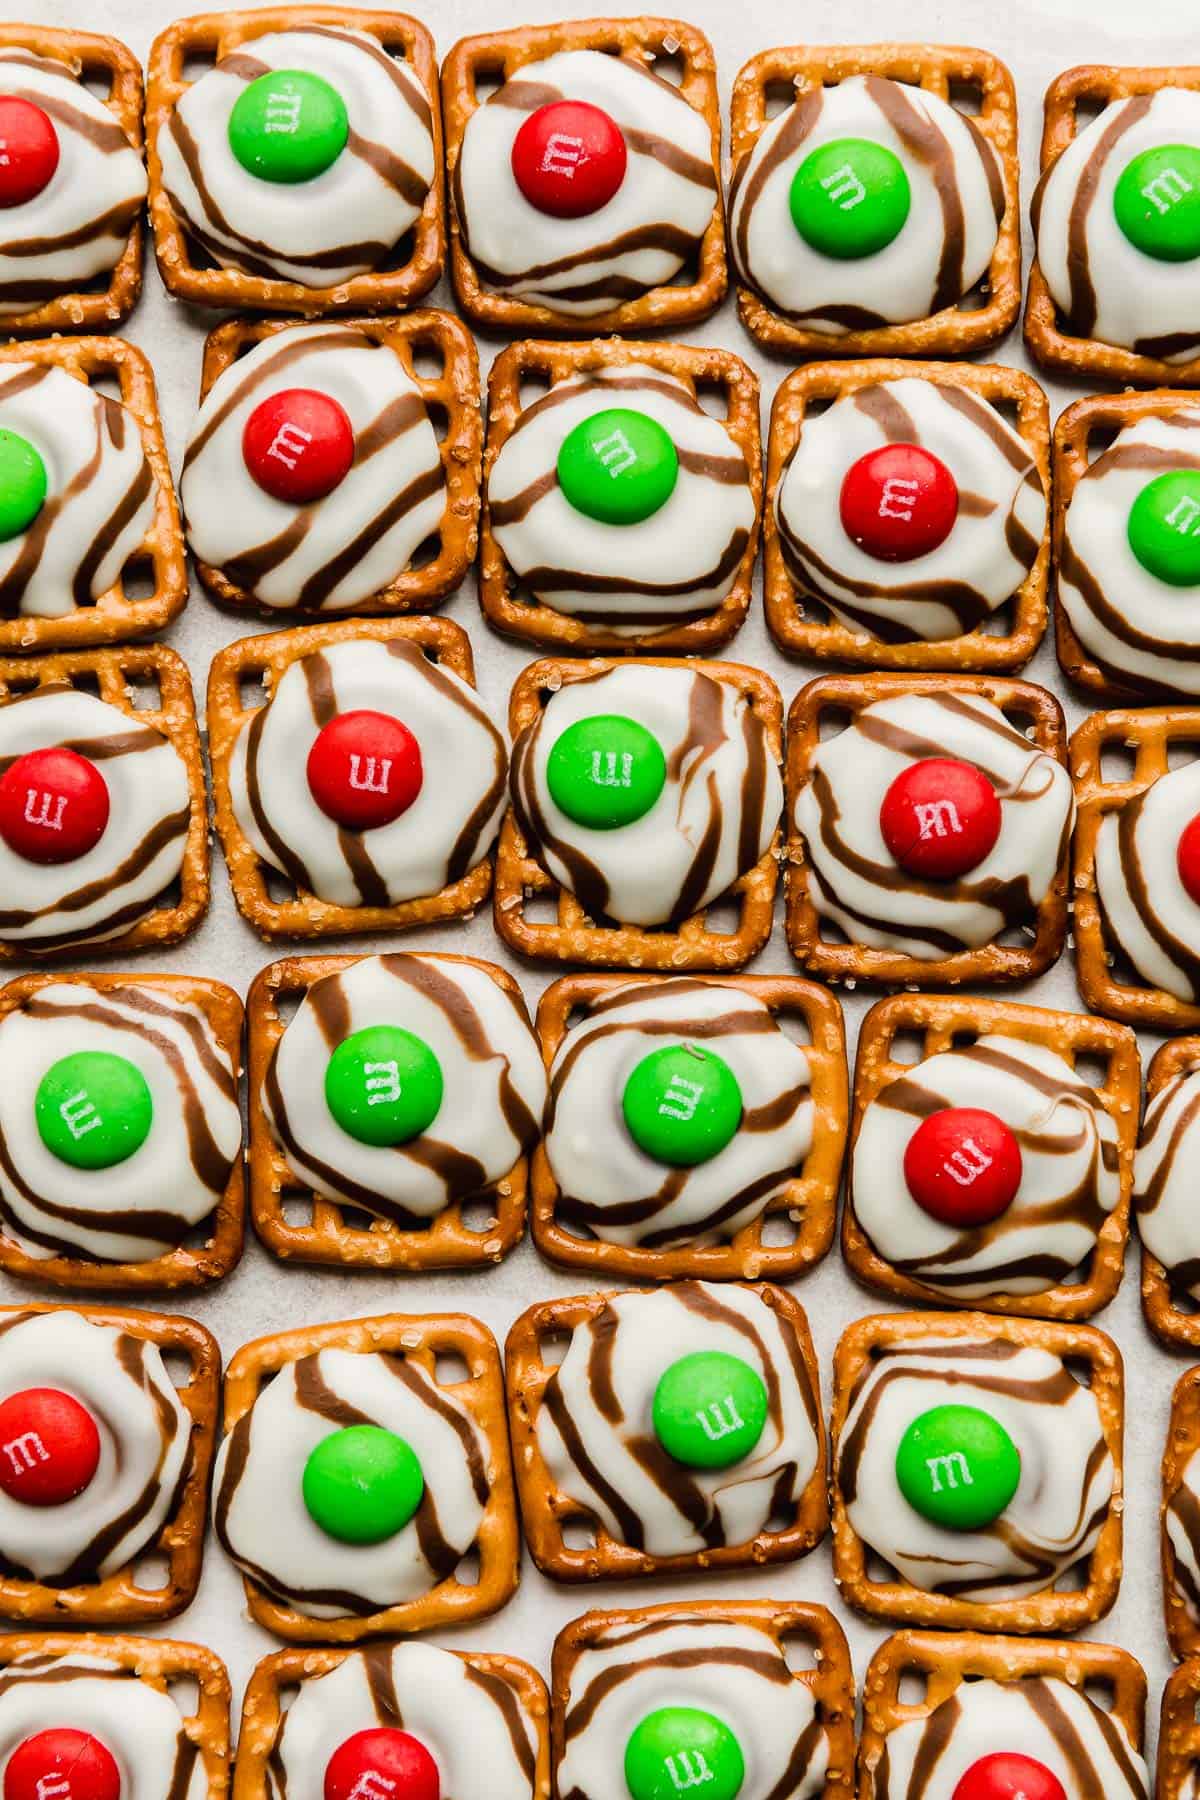 Red and green colored M&M's on top of melted hug candies on a square pretzel.